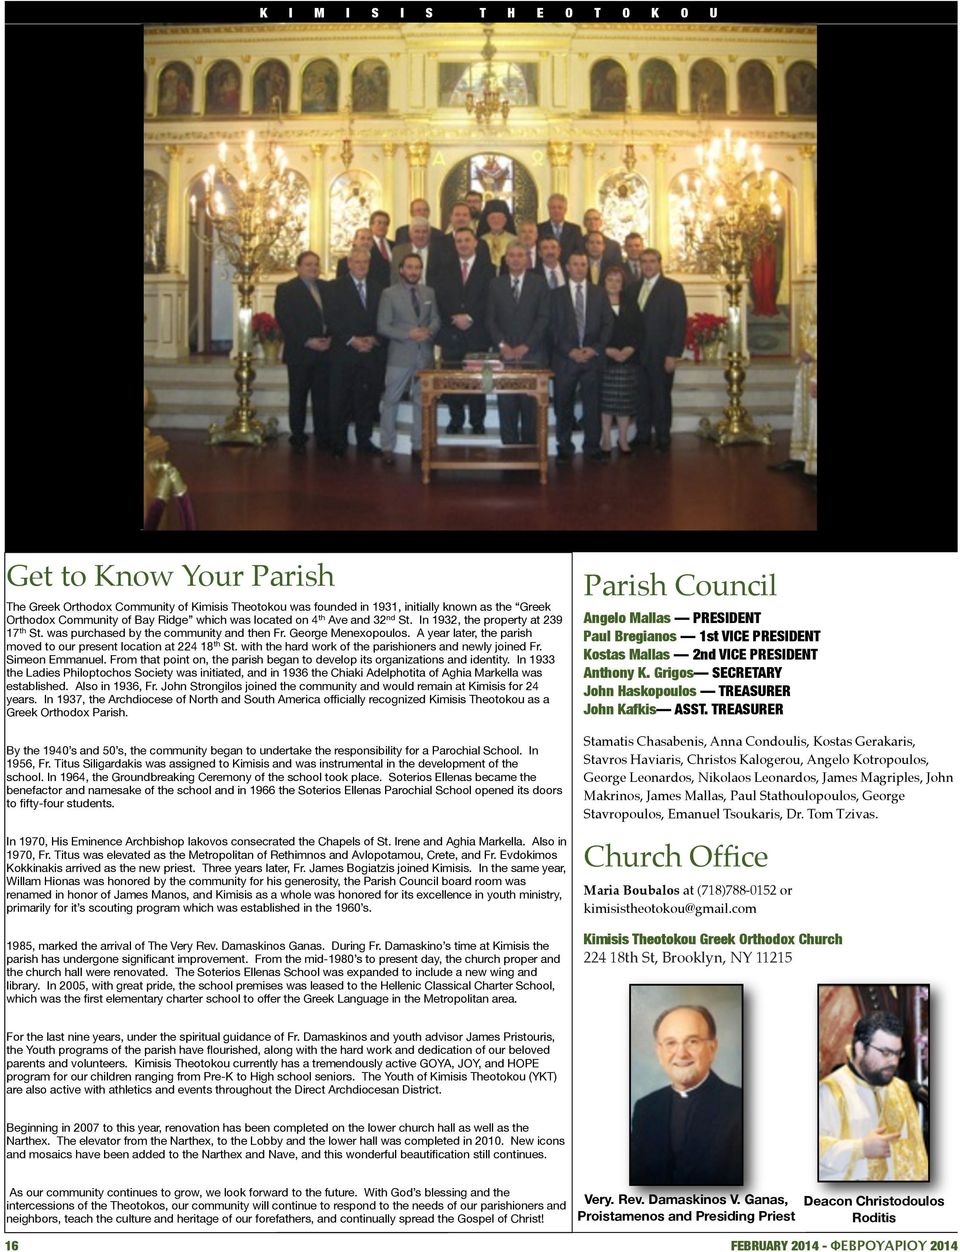 A year later, the parish moved to our present location at 224 18 th St. with the hard work of the parishioners and newly joined Fr. Simeon Emmanuel.